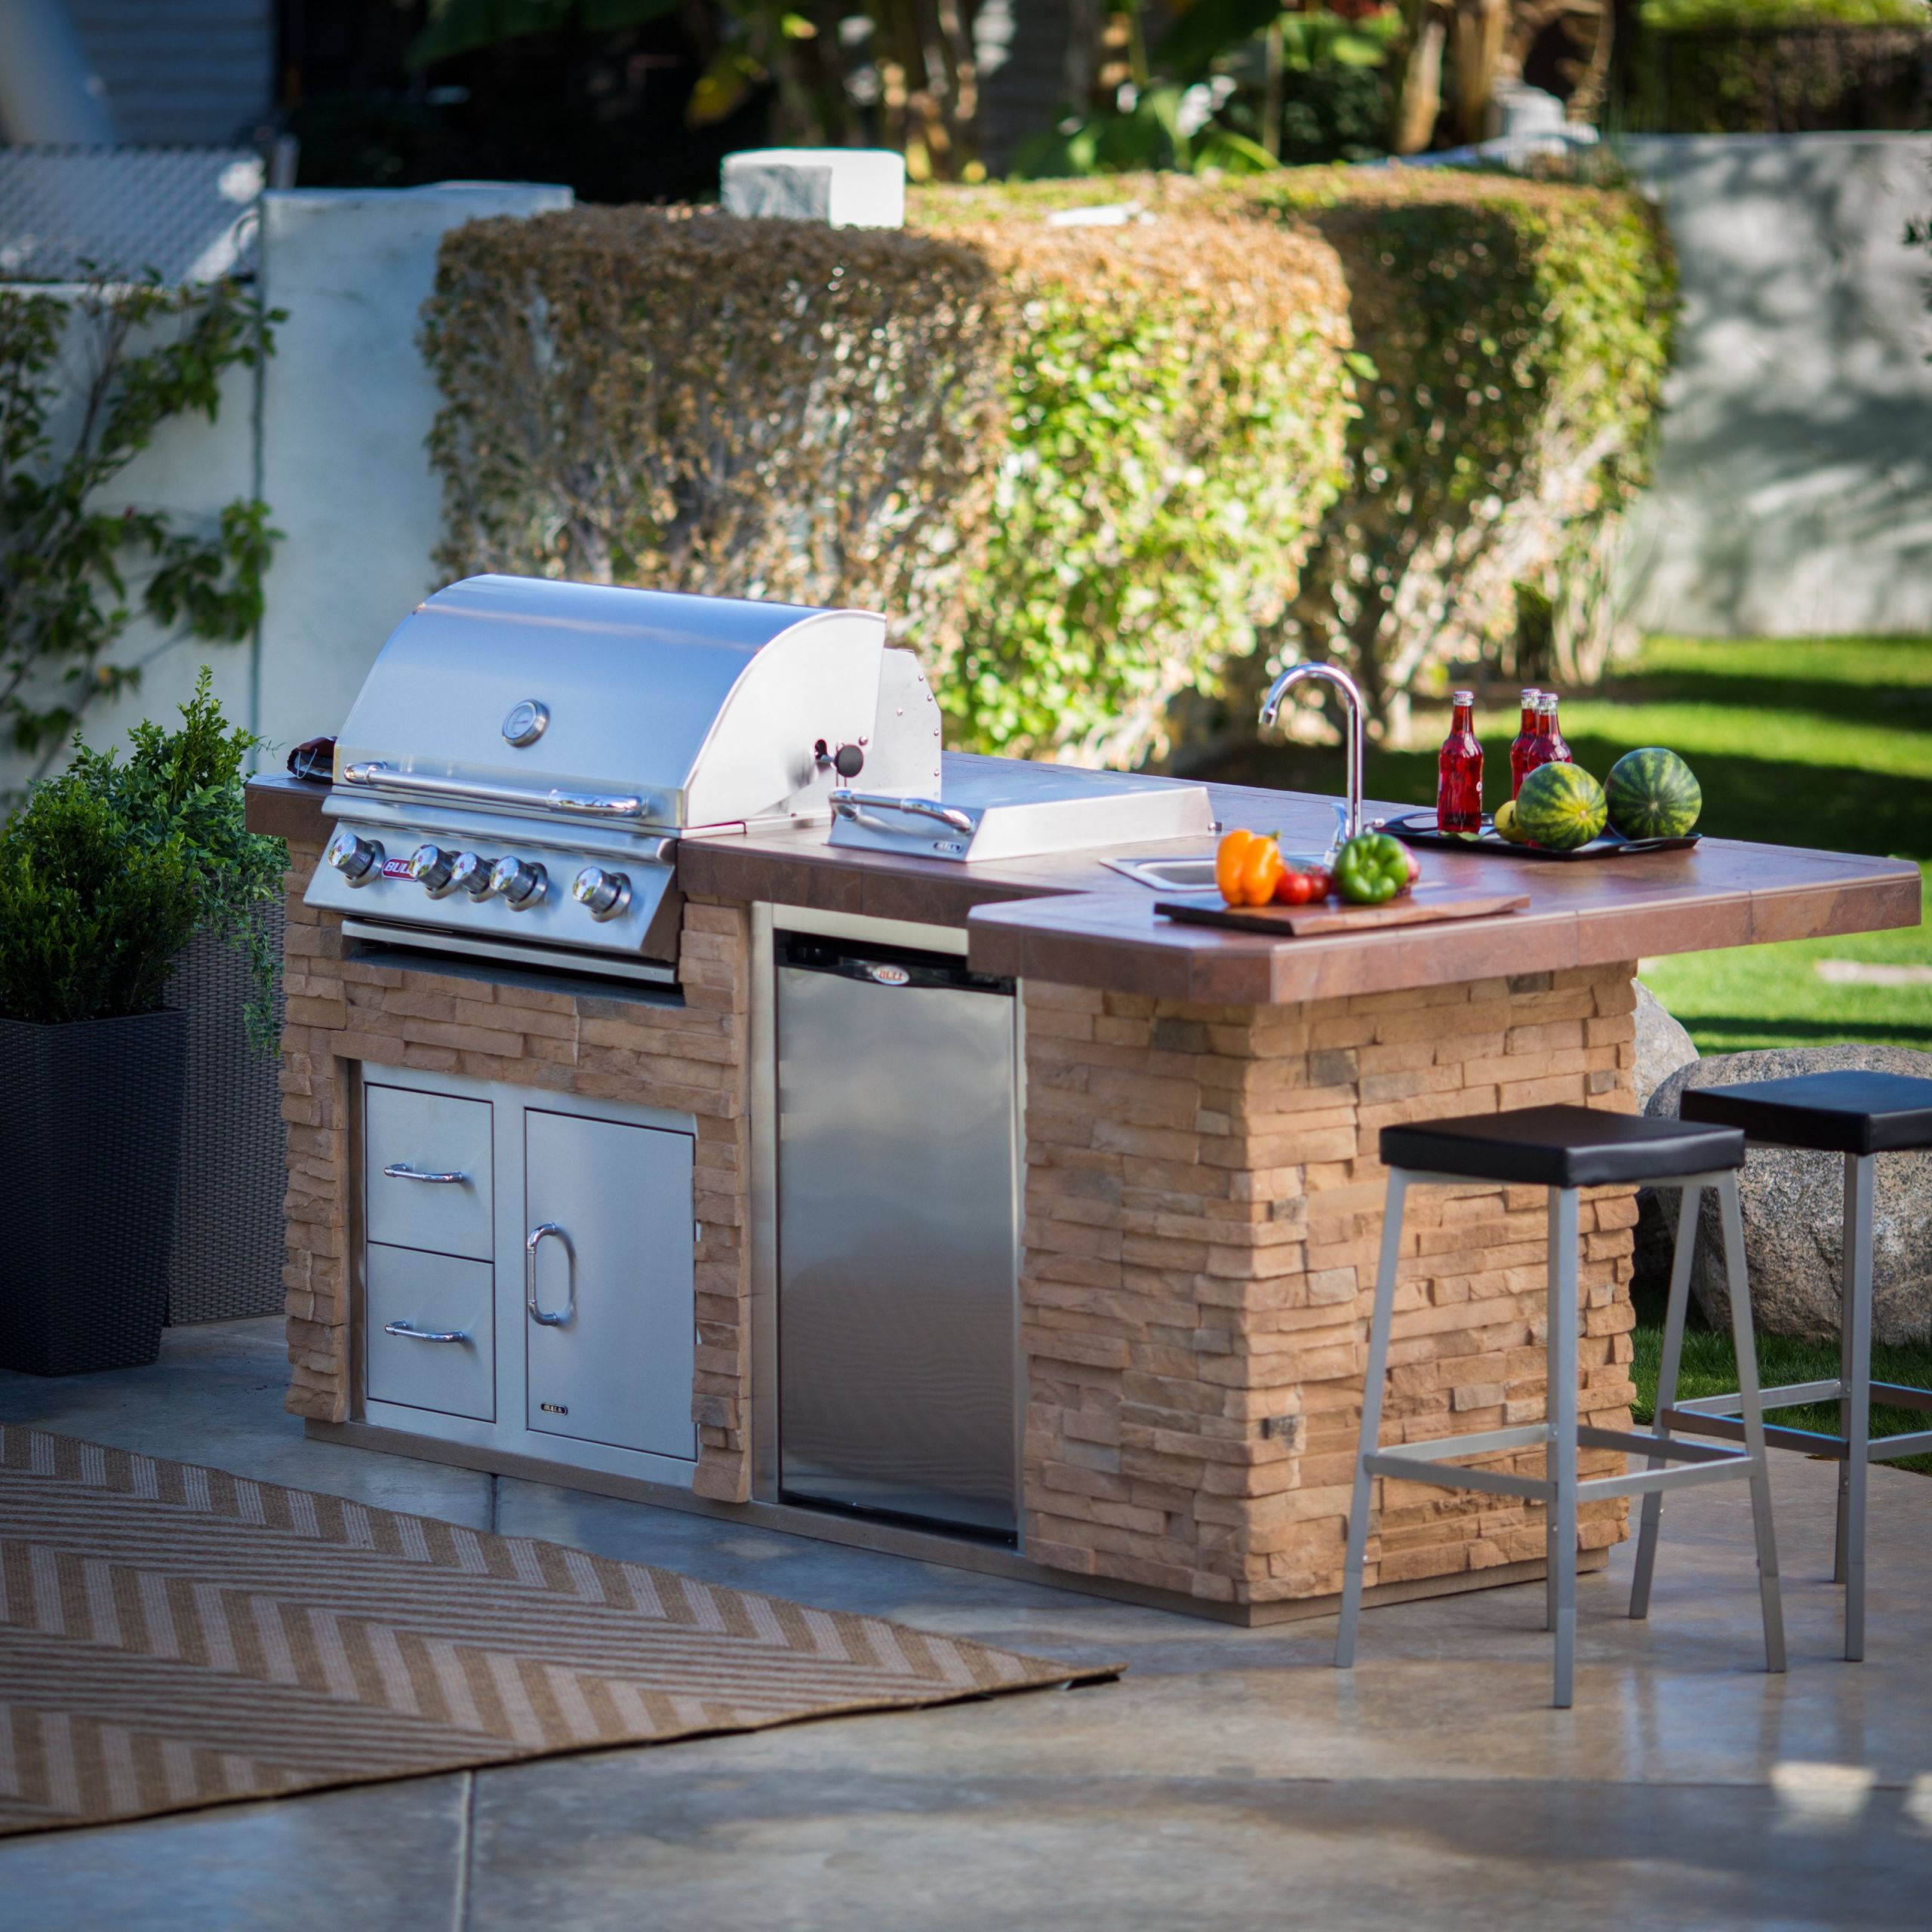 Outdoor Grill Kitchen
 Bull BBQ Grill Island Outdoor Kitchens at Hayneedle